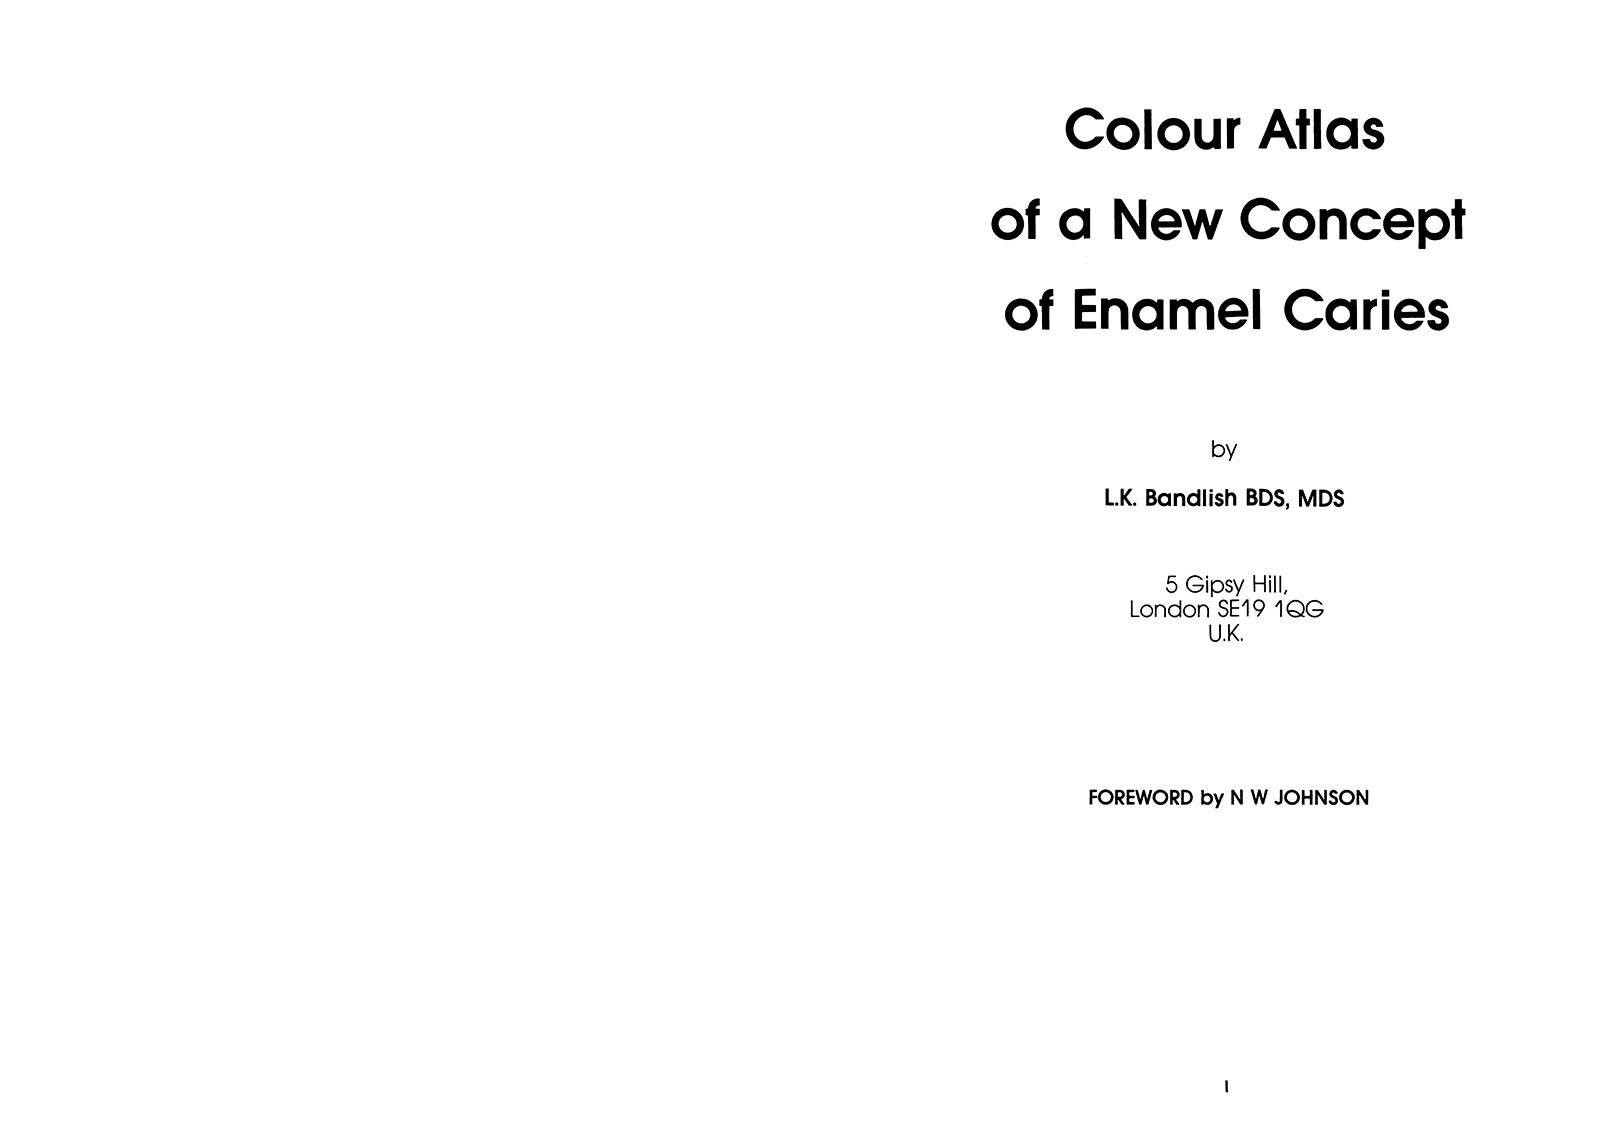 Colour_Atlas_of_a_New_Concept_of_Enamel_Caries-High_Resolution_Page_003.jpg